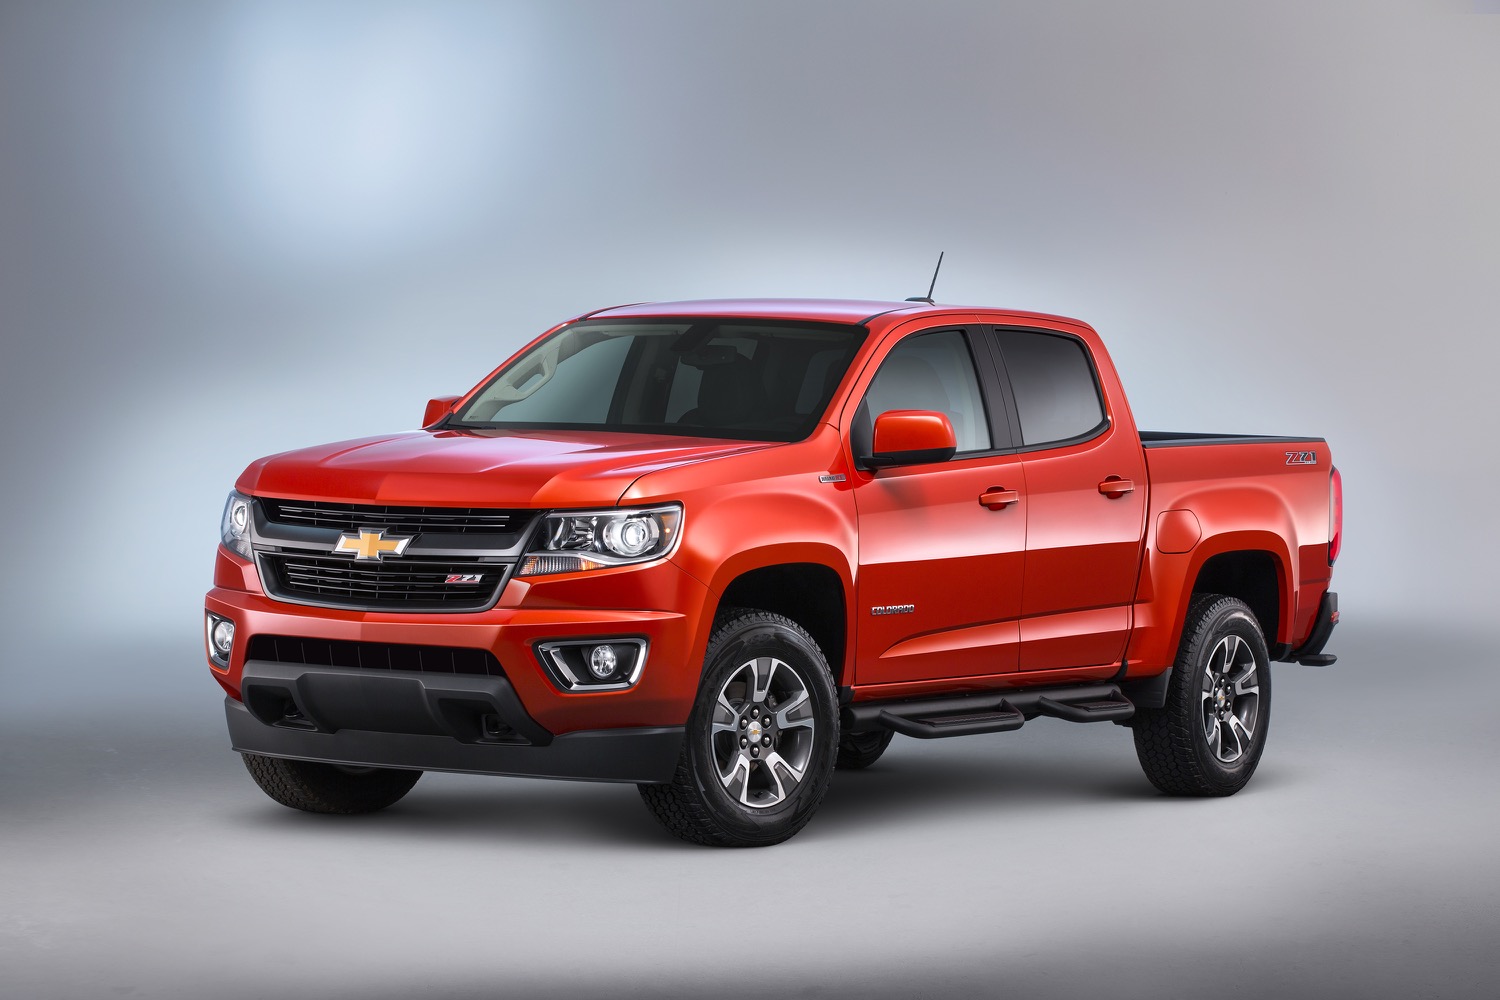 2016 Chevrolet Colorado (Chevy) Review, Ratings, Specs, Prices, and Photos  - The Car Connection